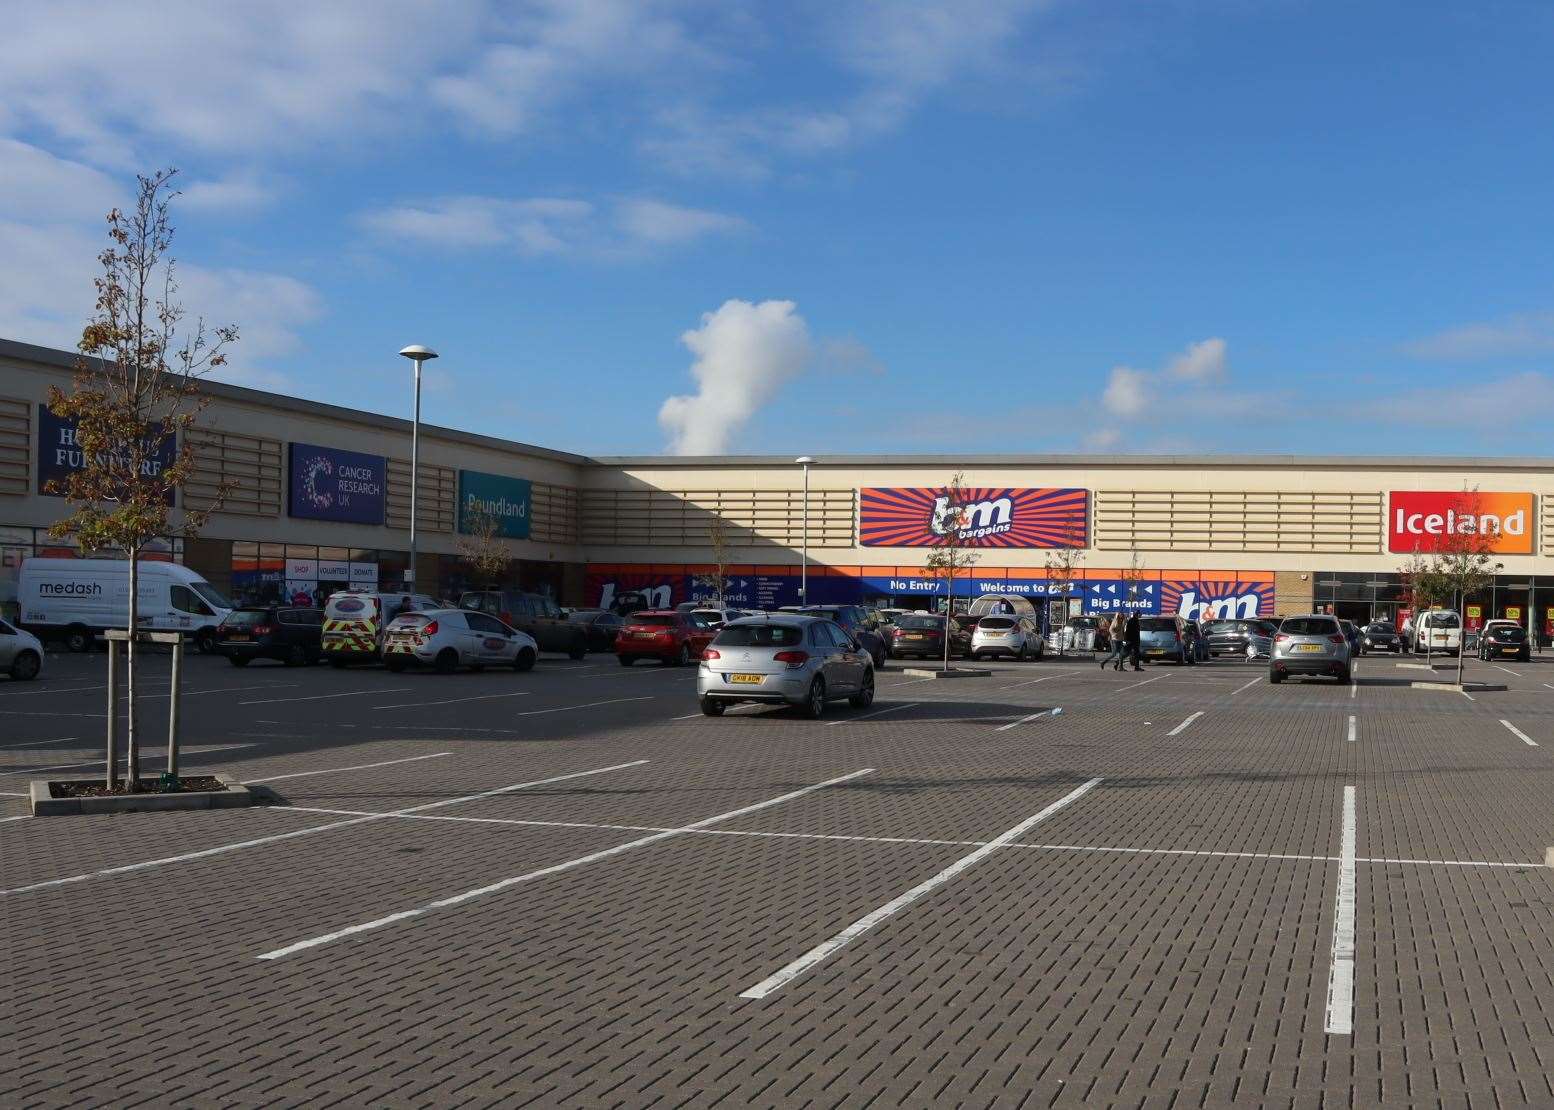 Neats Court Retail Park in Queenborough, Sheppey